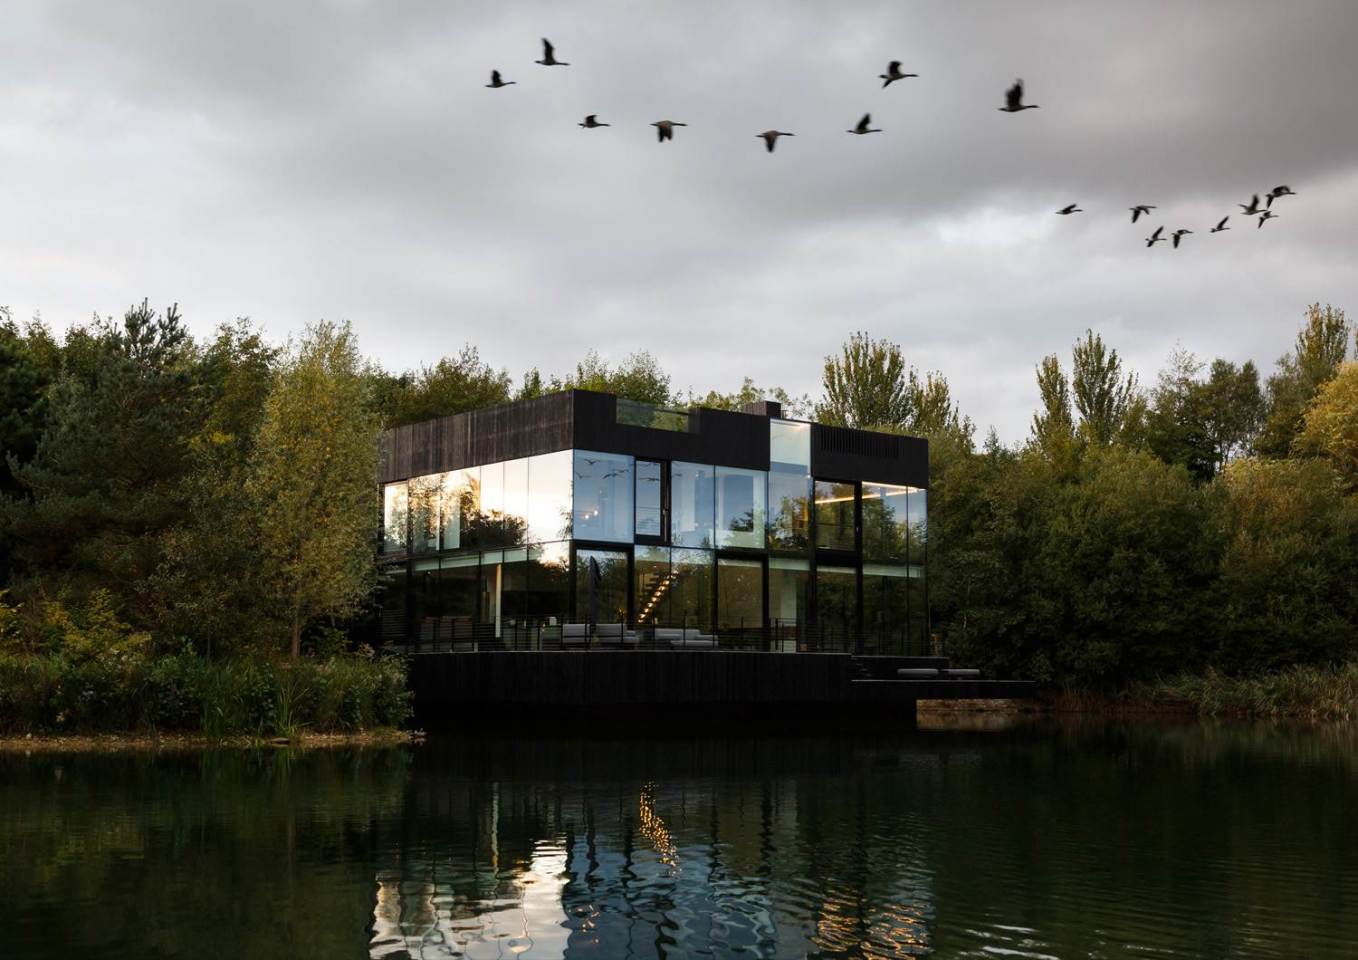 As the name might suggest, the Glass Villa on the lake is big on transparency